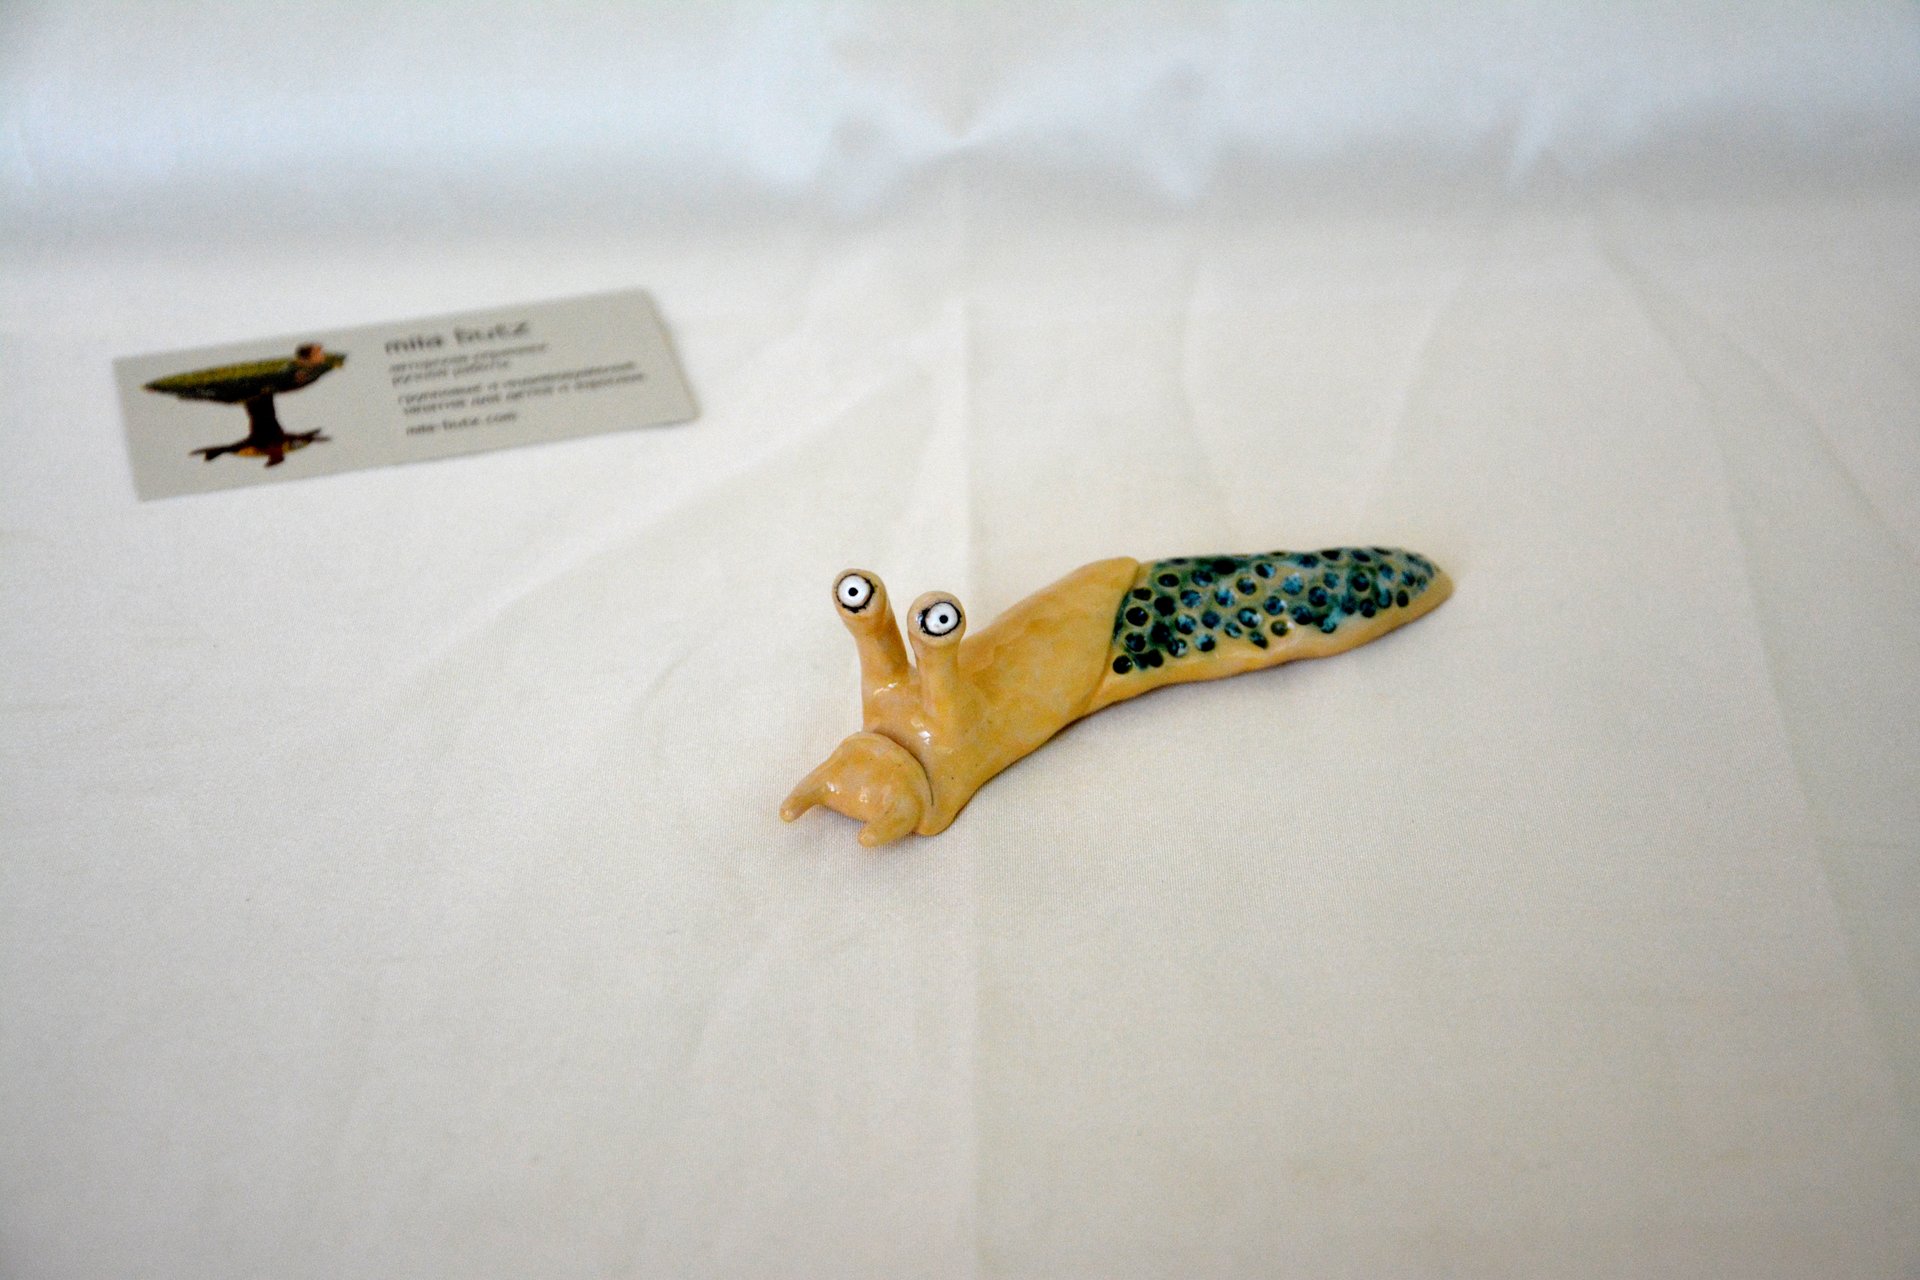 Figurine of a Cochlea without a house, height - 1.5 cm, photo 5 of 5.